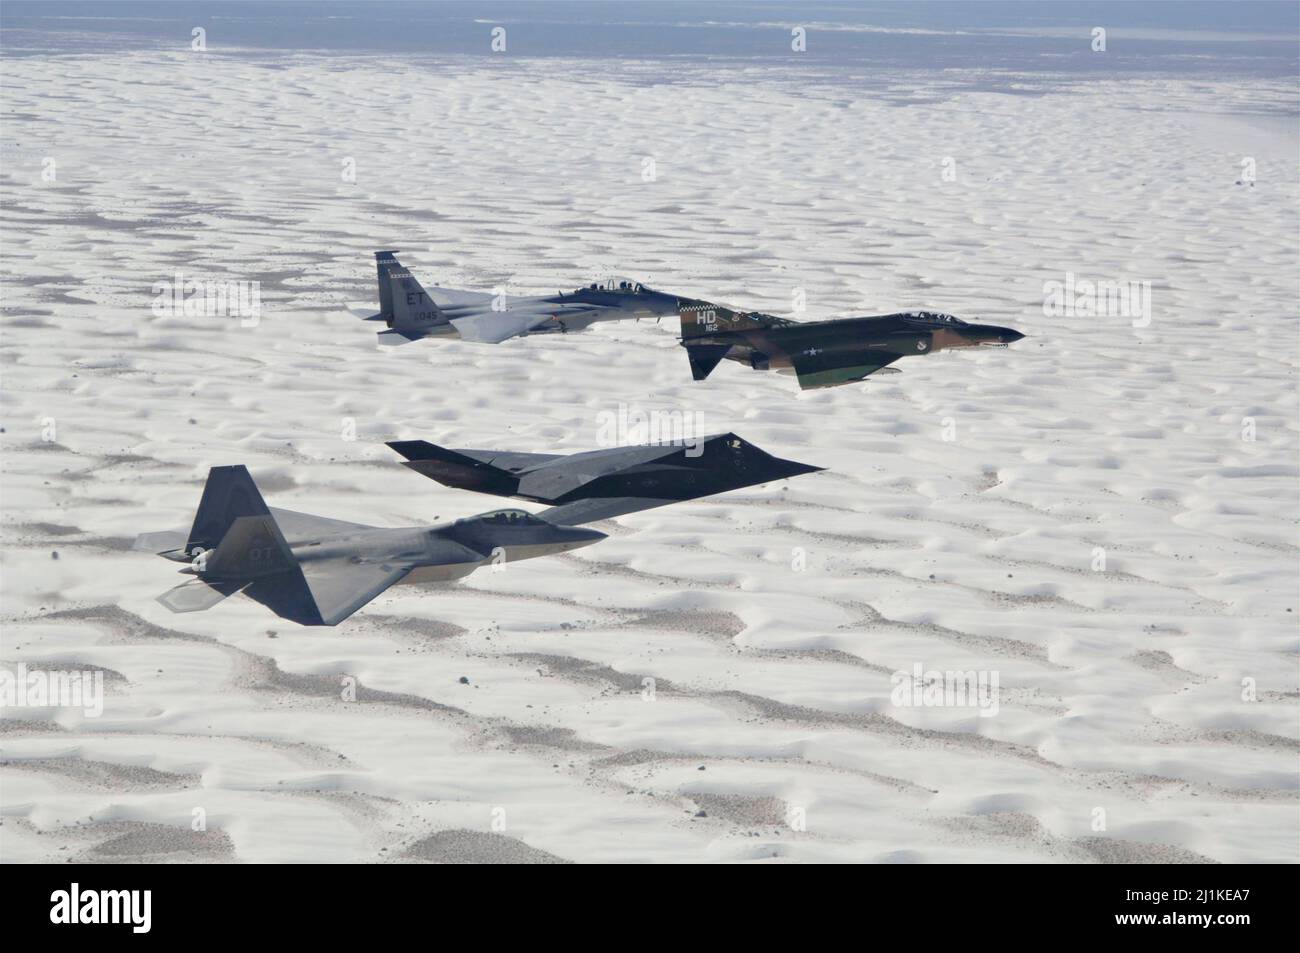 Holloman Air Force Base, United States. 27 October, 2007. A U.S. Air Force F-15 Eagle, F-4 Phantom, F-117 Nighthawk, and F-22 Raptor fighter aircraft fly in formation above the White Sands during the Air and Space Expo at Holloman Air Force Base, October 27, 2007 in Alamogordo, New Mexico.  Credit: SrA Russell Scalf/US Air Force/Alamy Live News Stock Photo